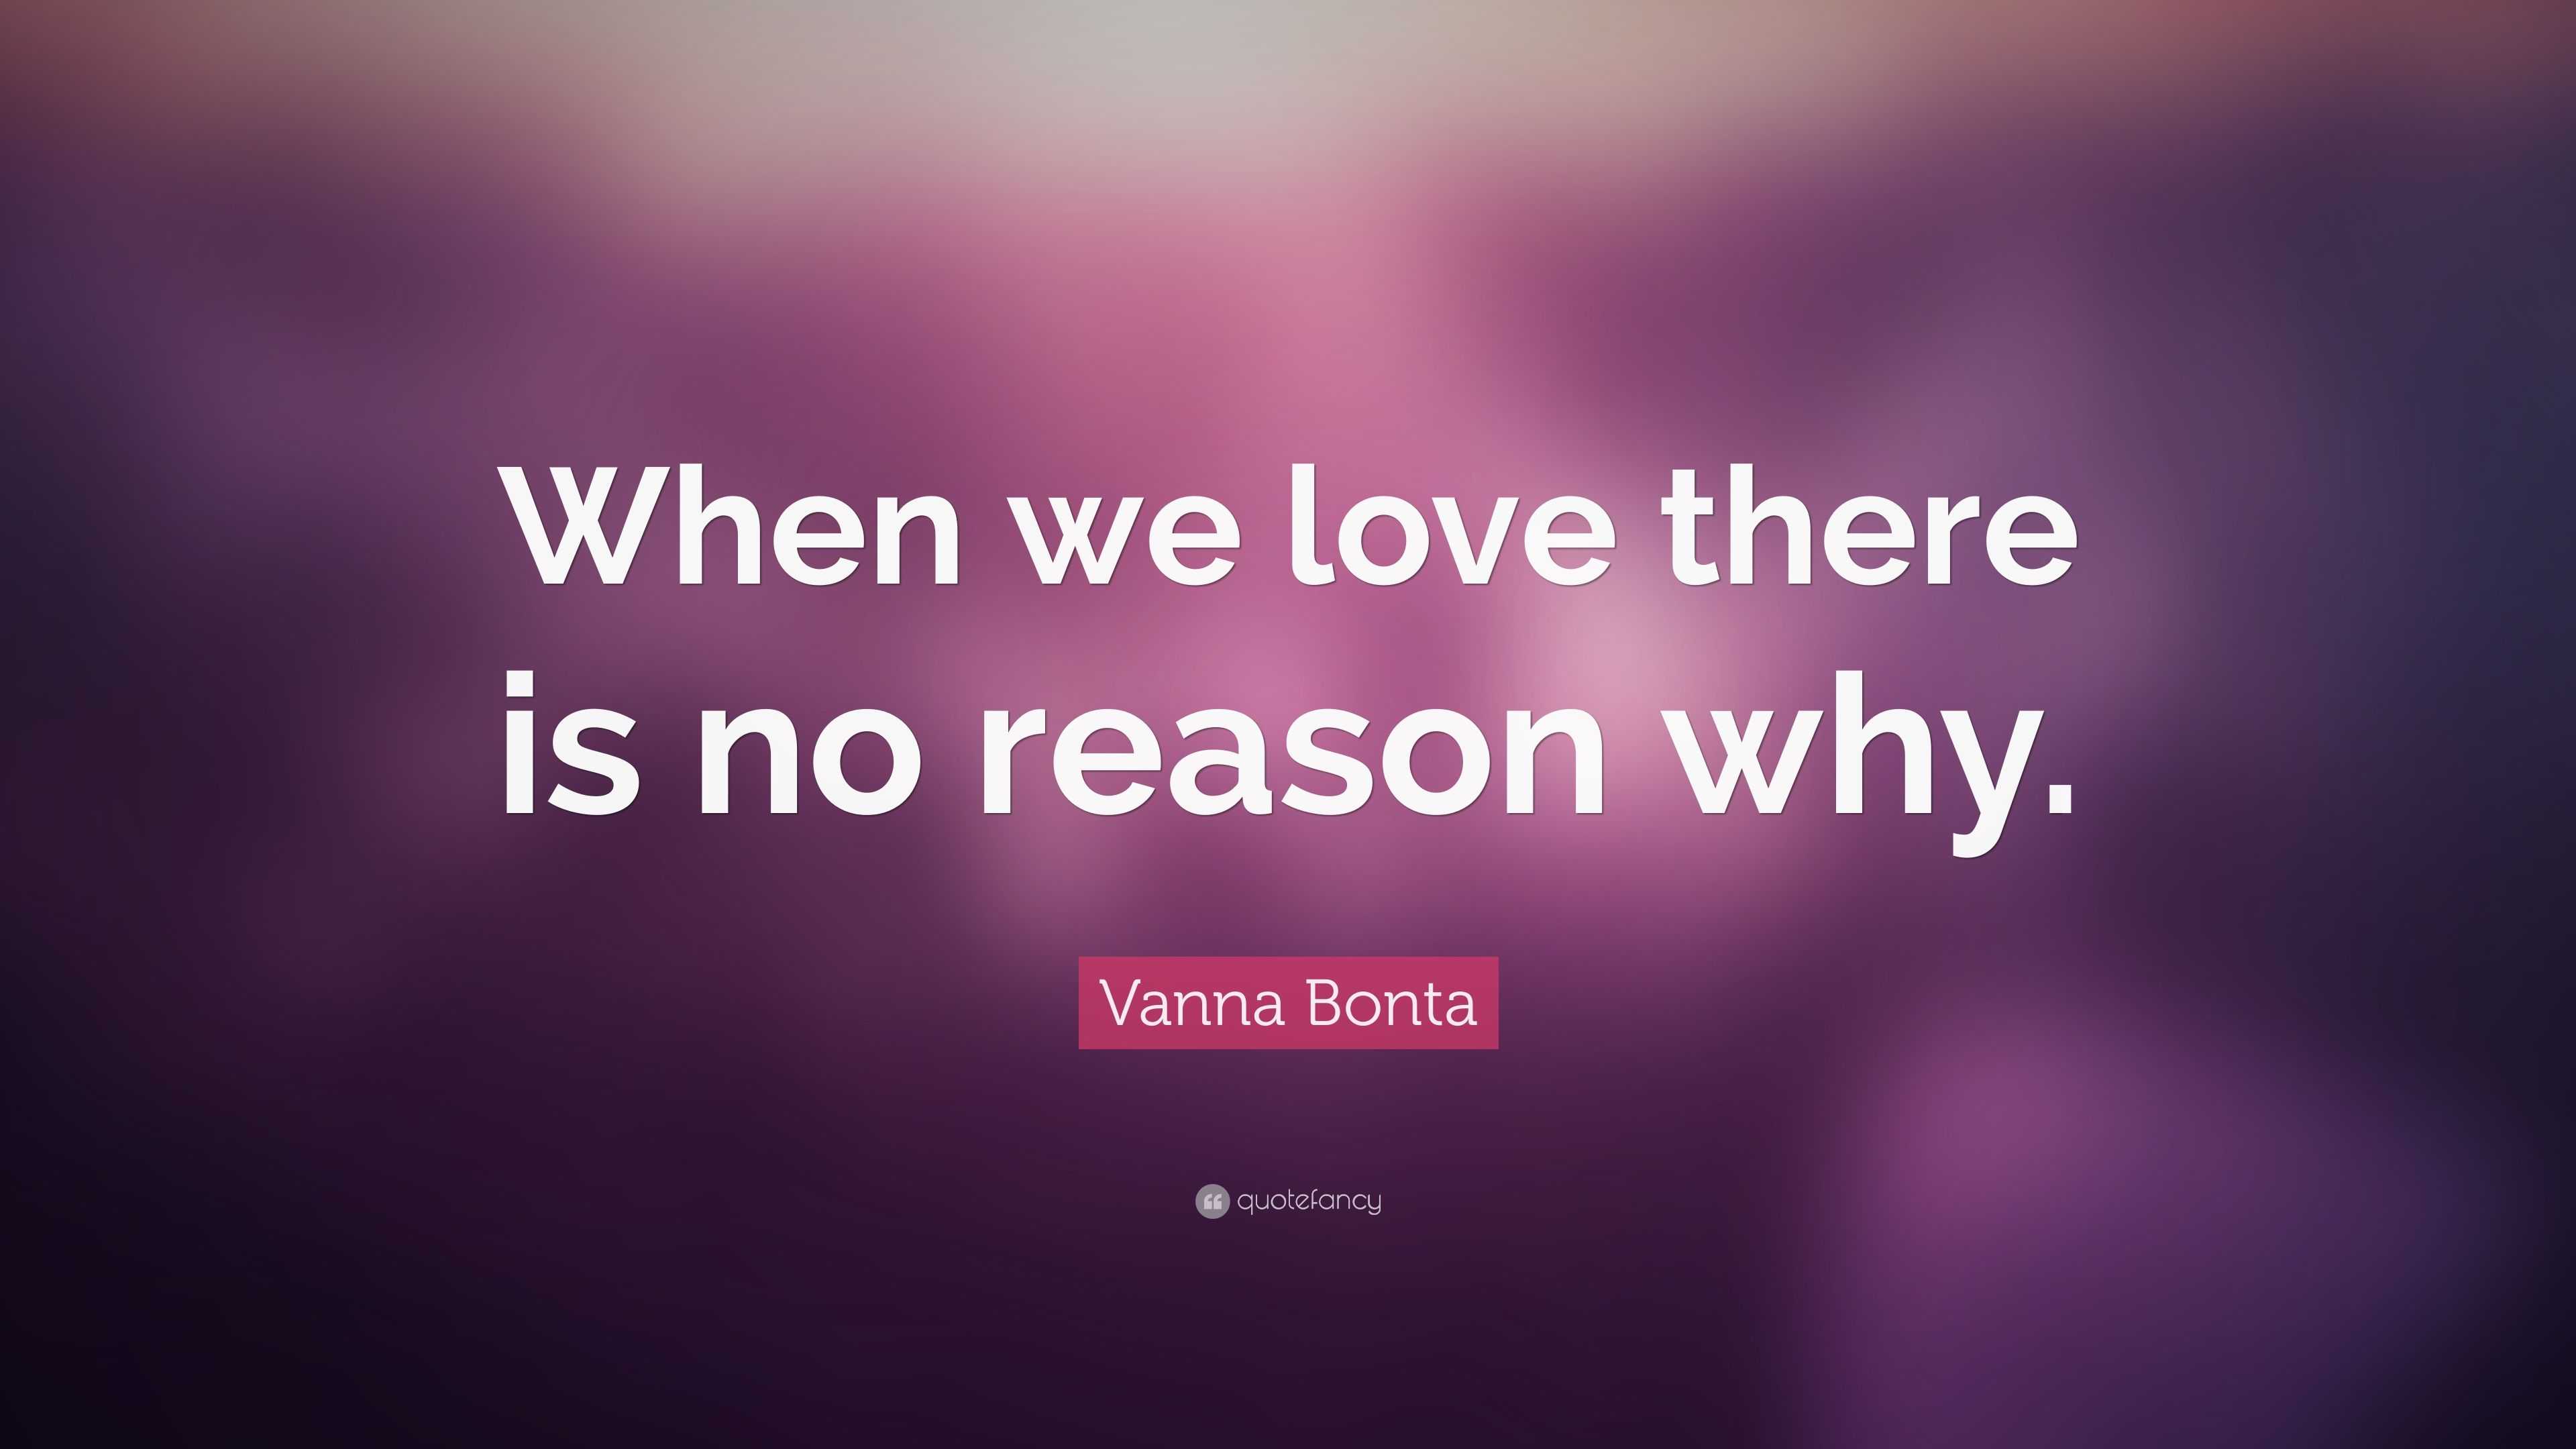 Vanna Bonta Quote: “When we love there is no reason why.”